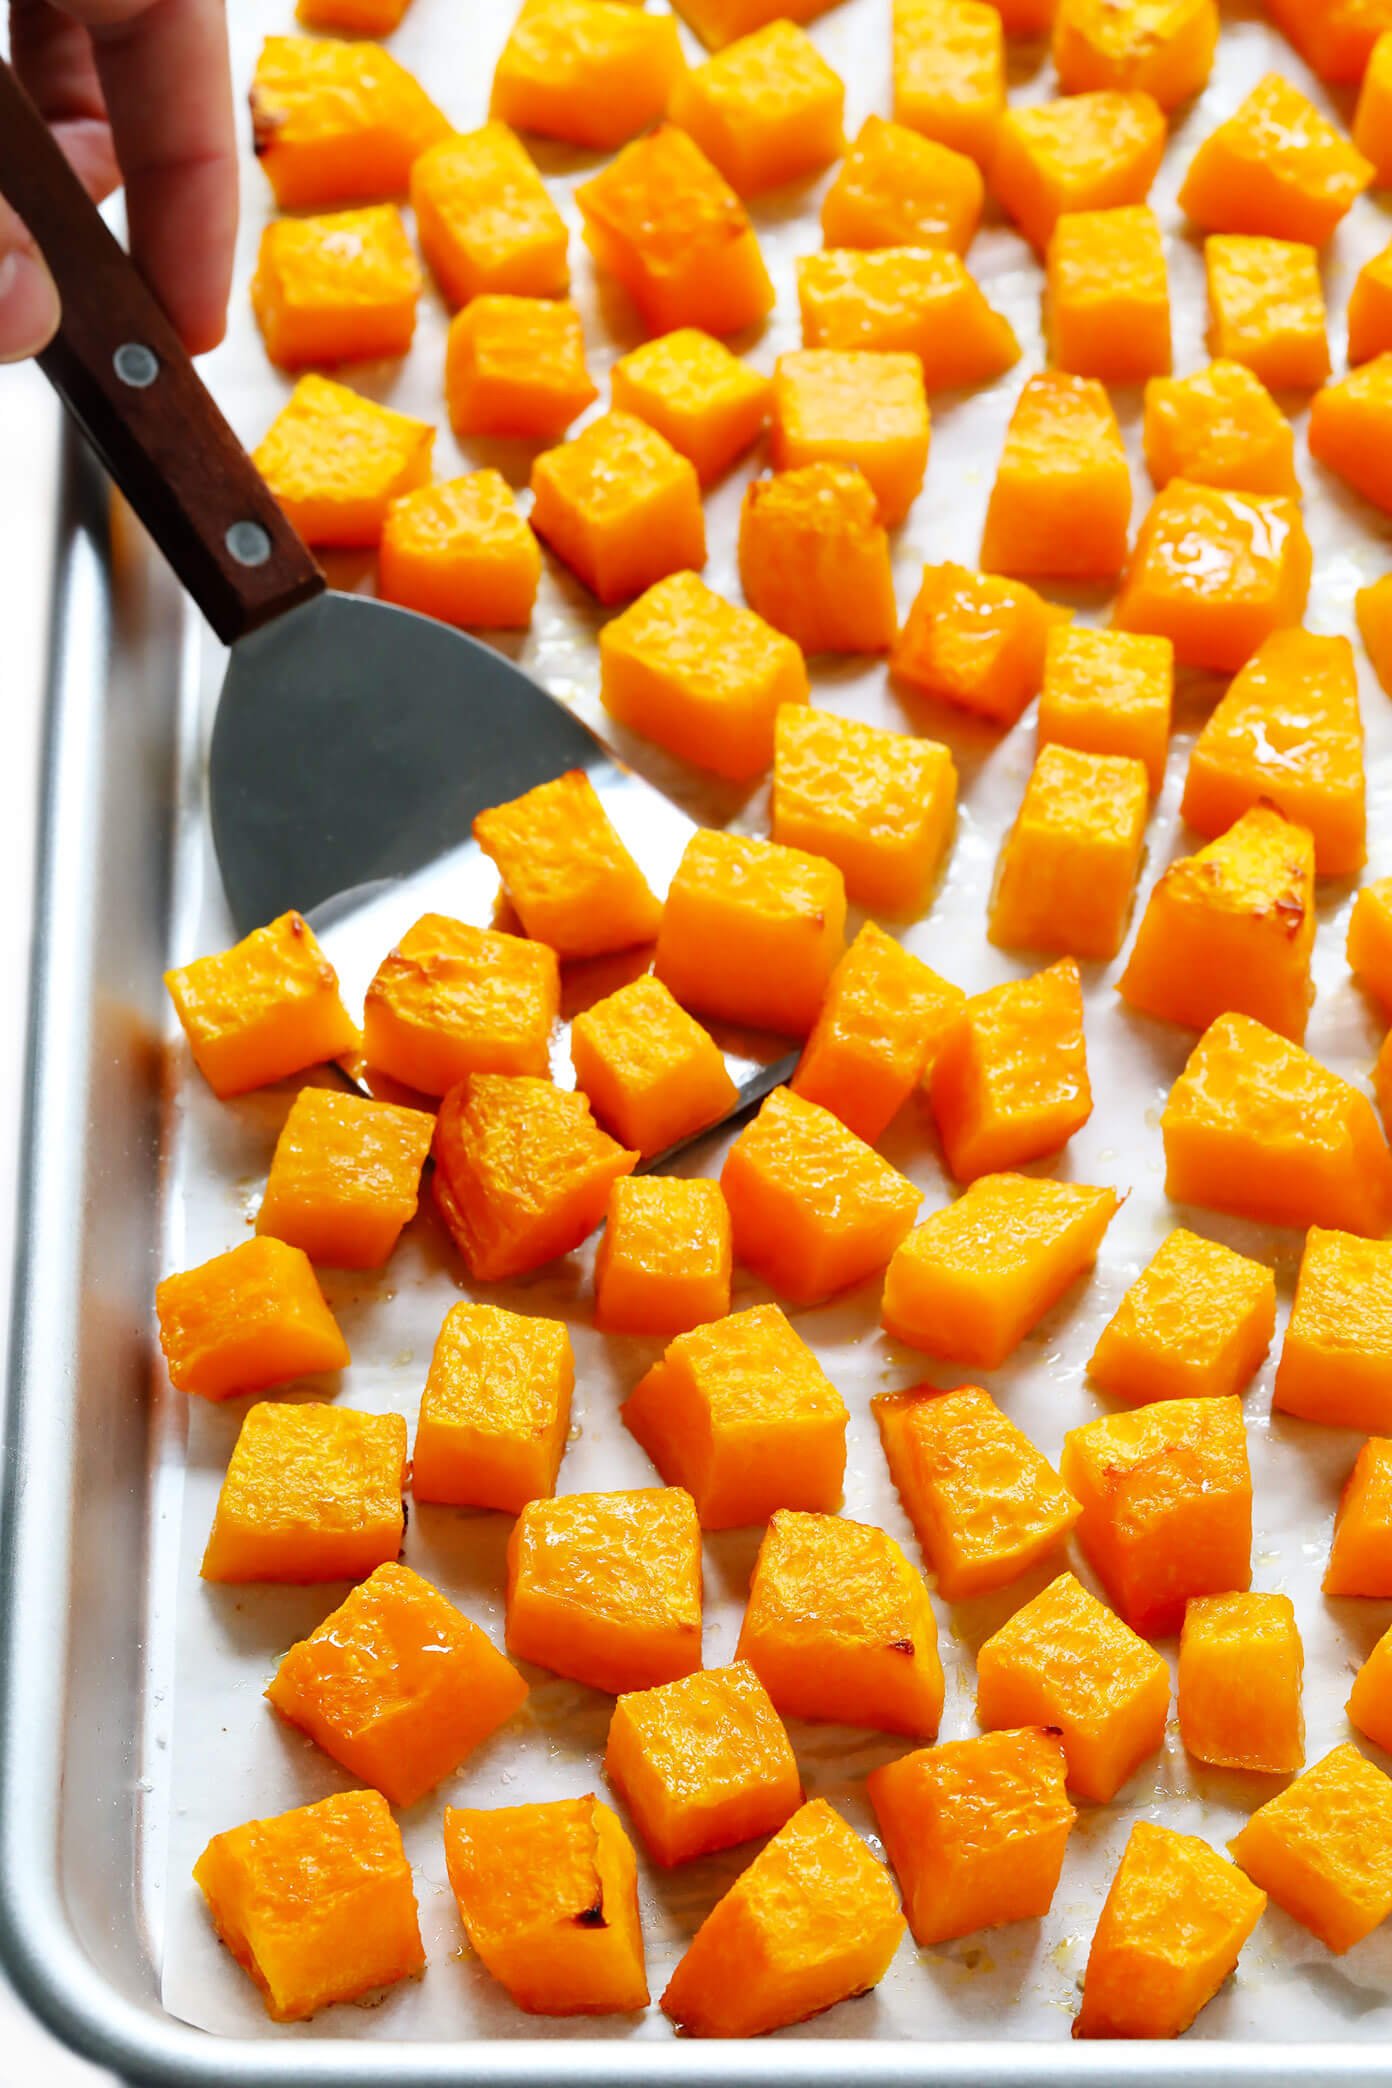 Roasted Butternut Squash (Cubes or Halves)